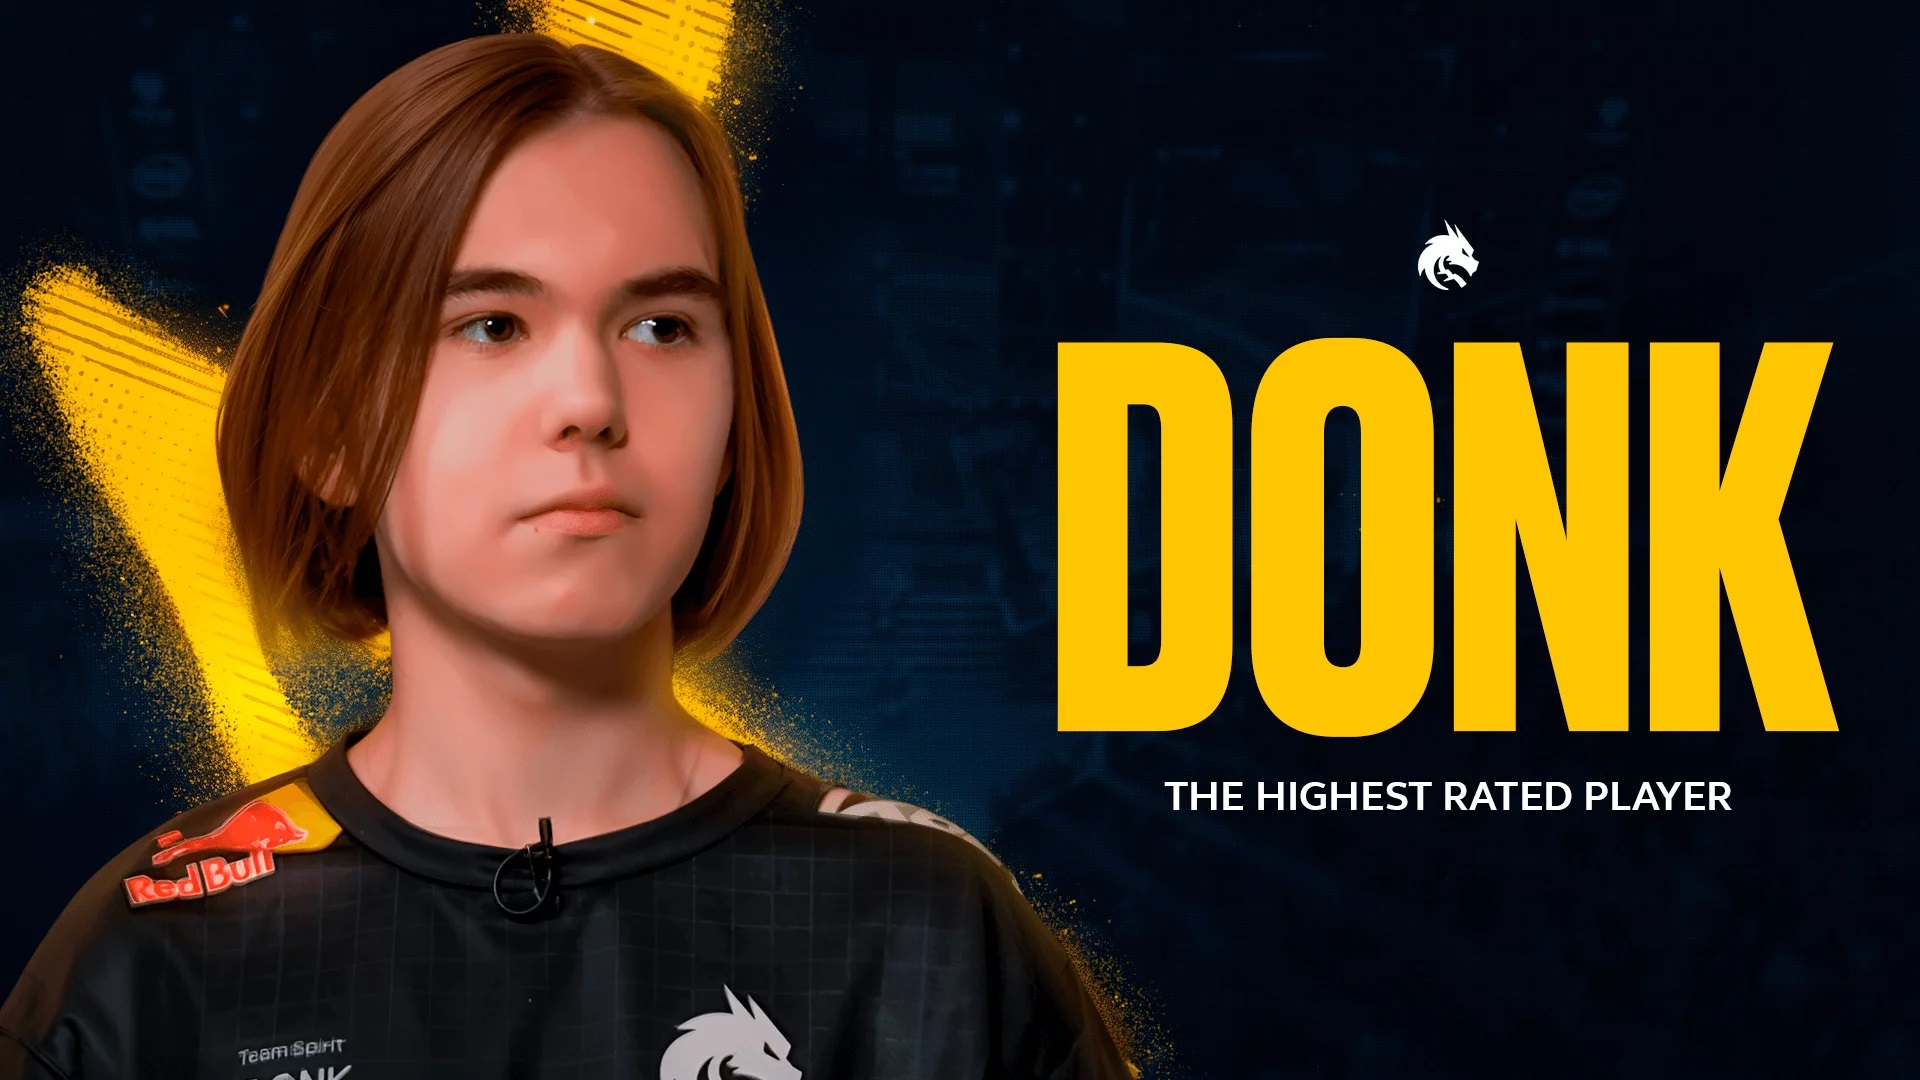 Donk the highest rated player